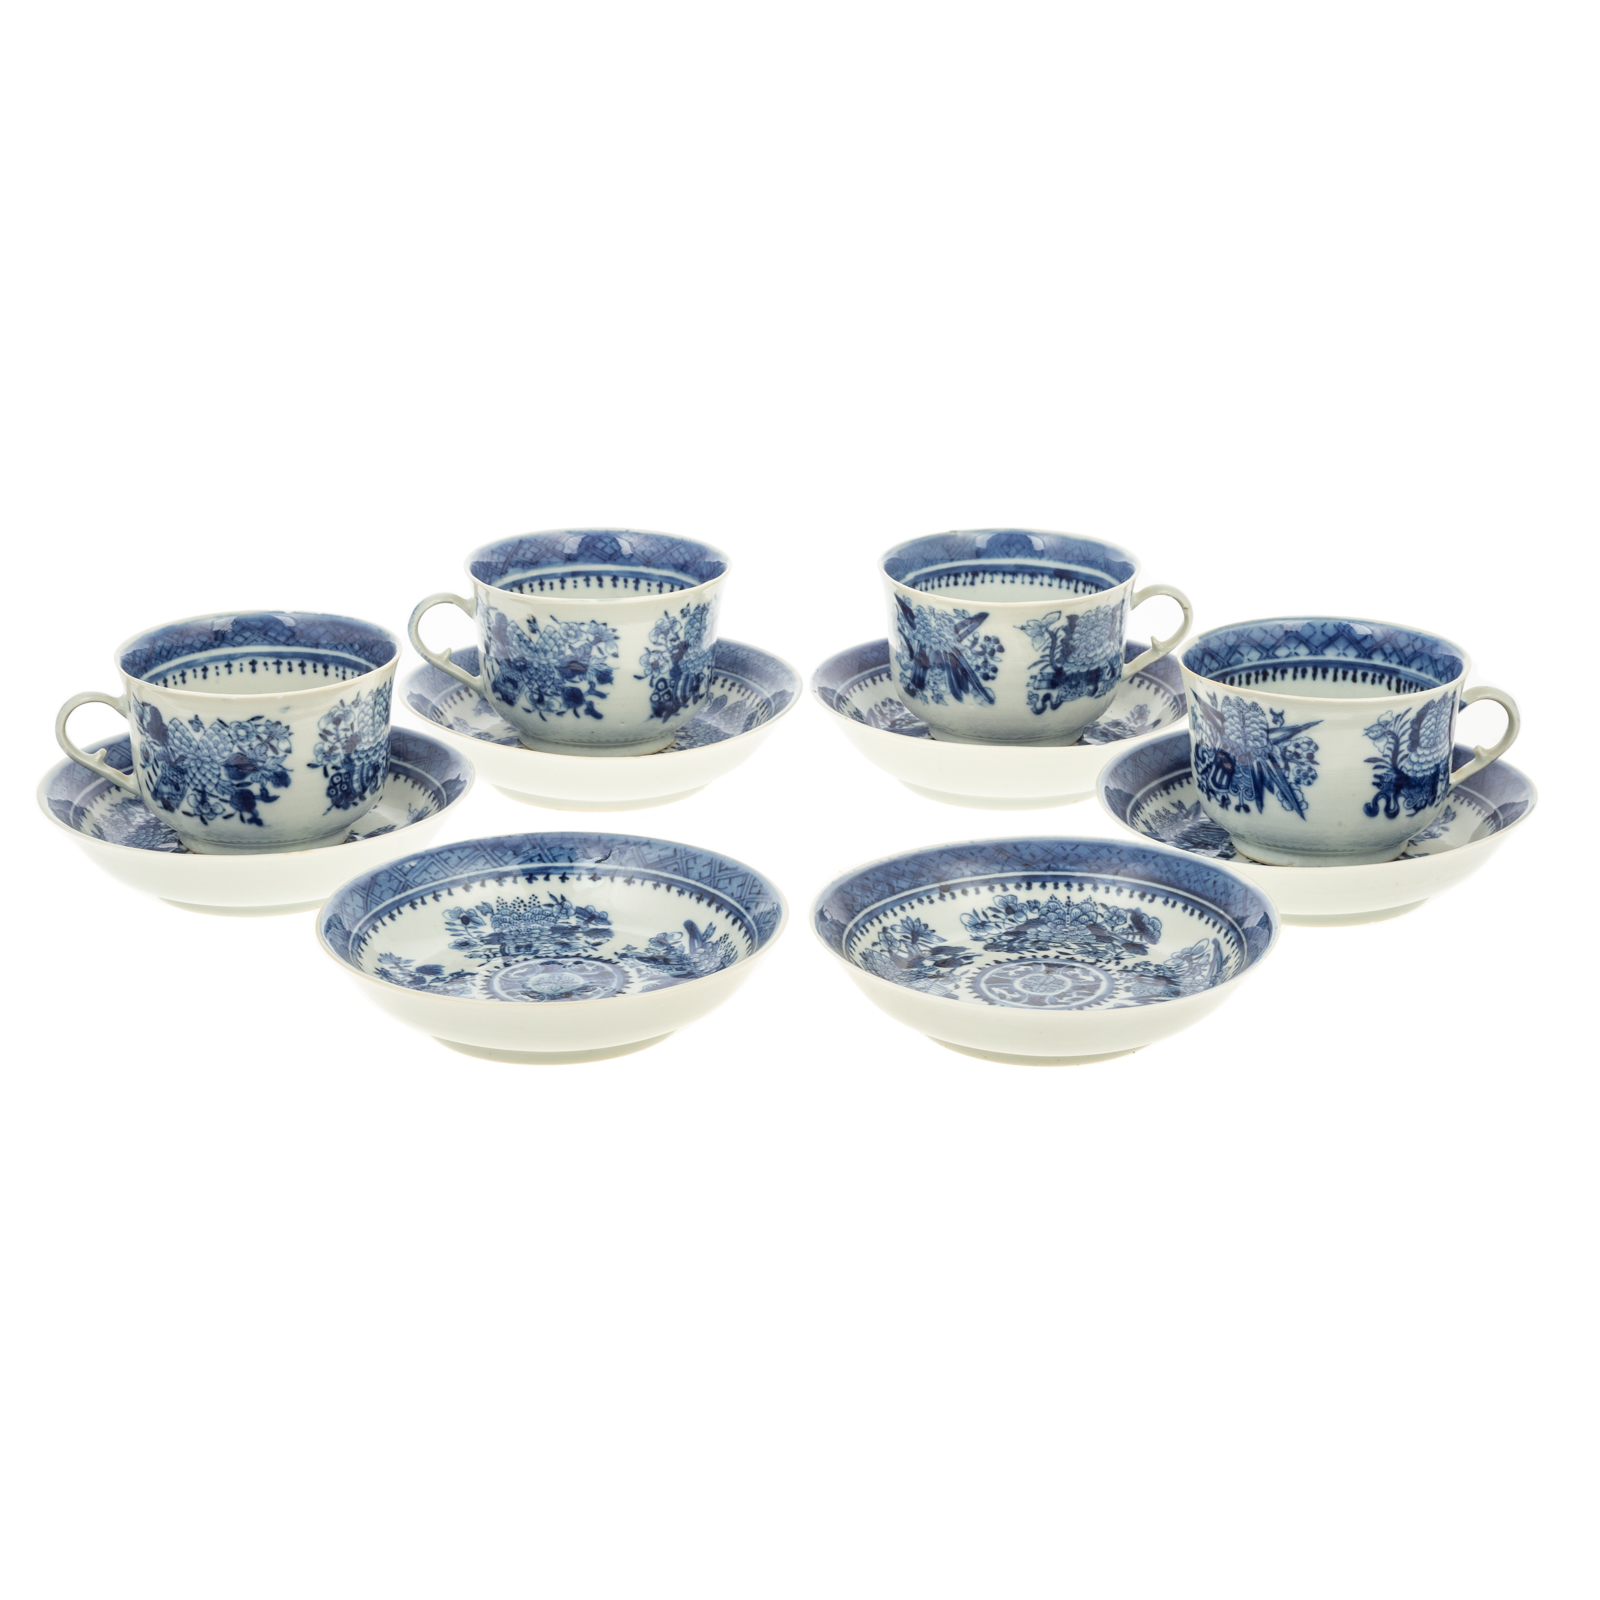 10 PIECES CHINESE EXPORT BLUE FITZHUGH 2ea179